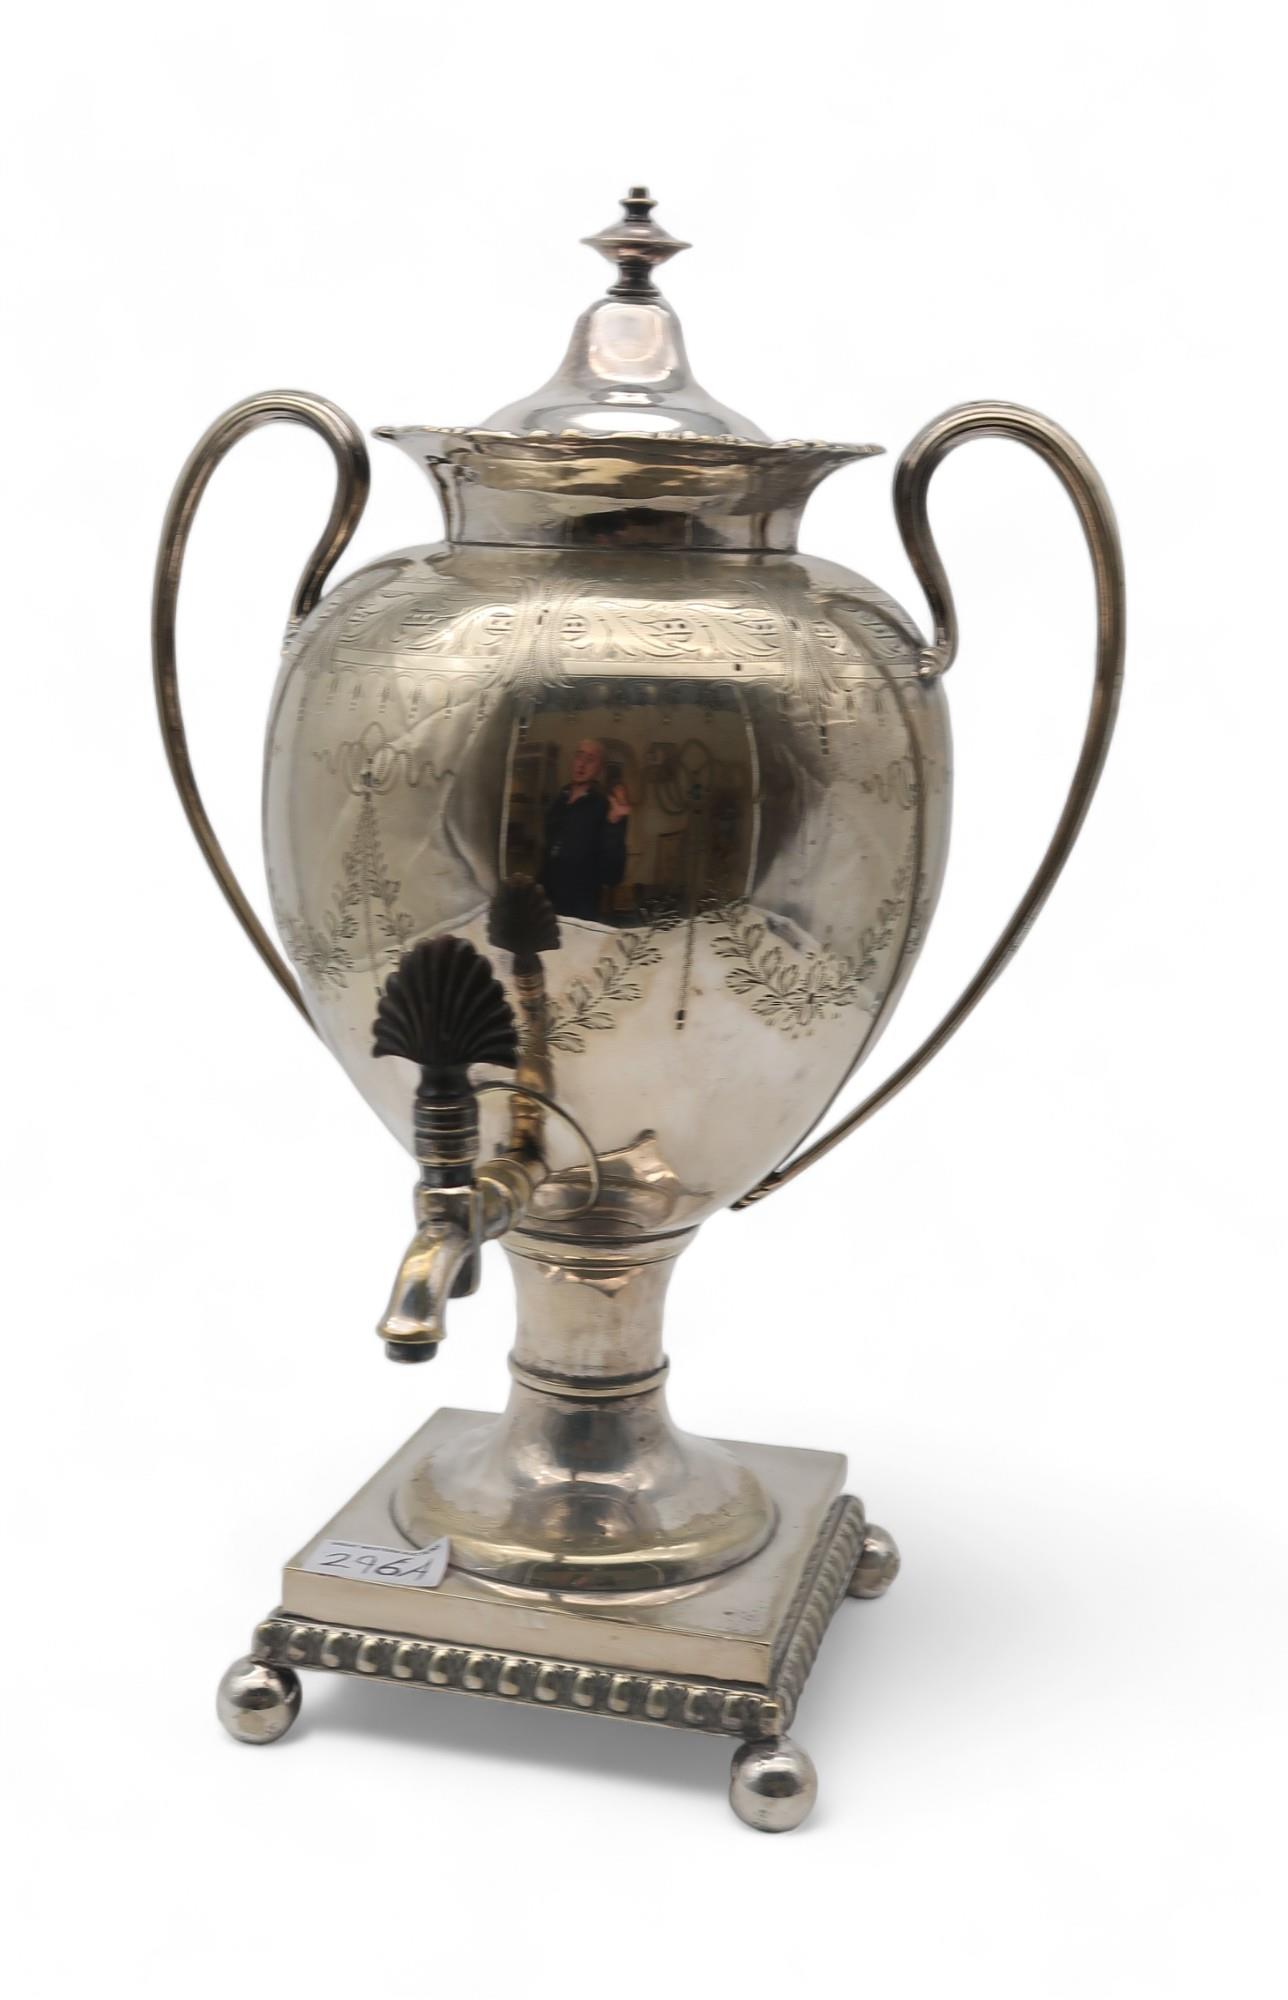 A Victorian silver plated tea urn, of neo-classical form, with engraved ribbon swags, with an